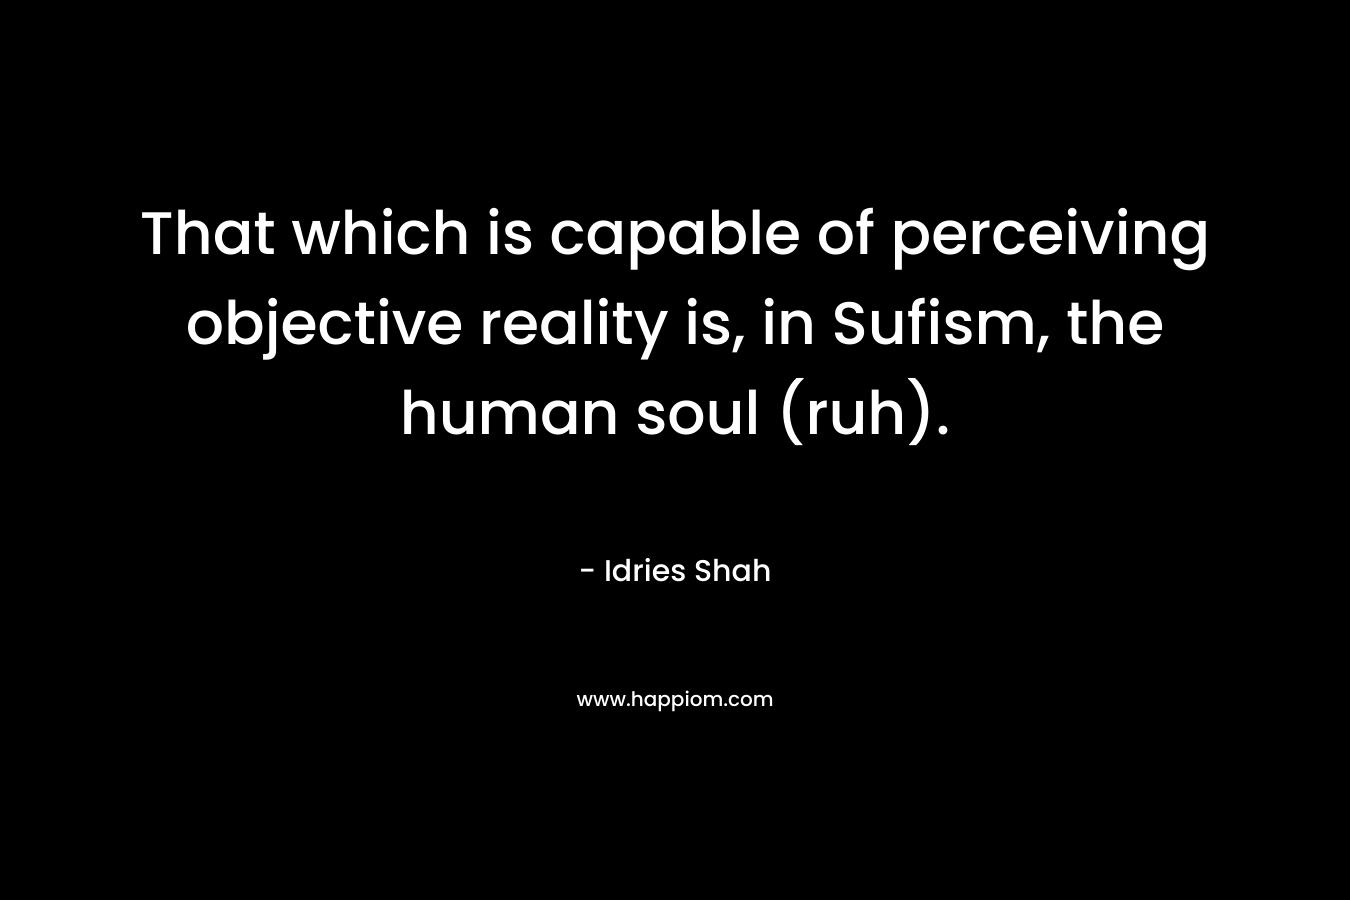 That which is capable of perceiving objective reality is, in Sufism, the human soul (ruh).